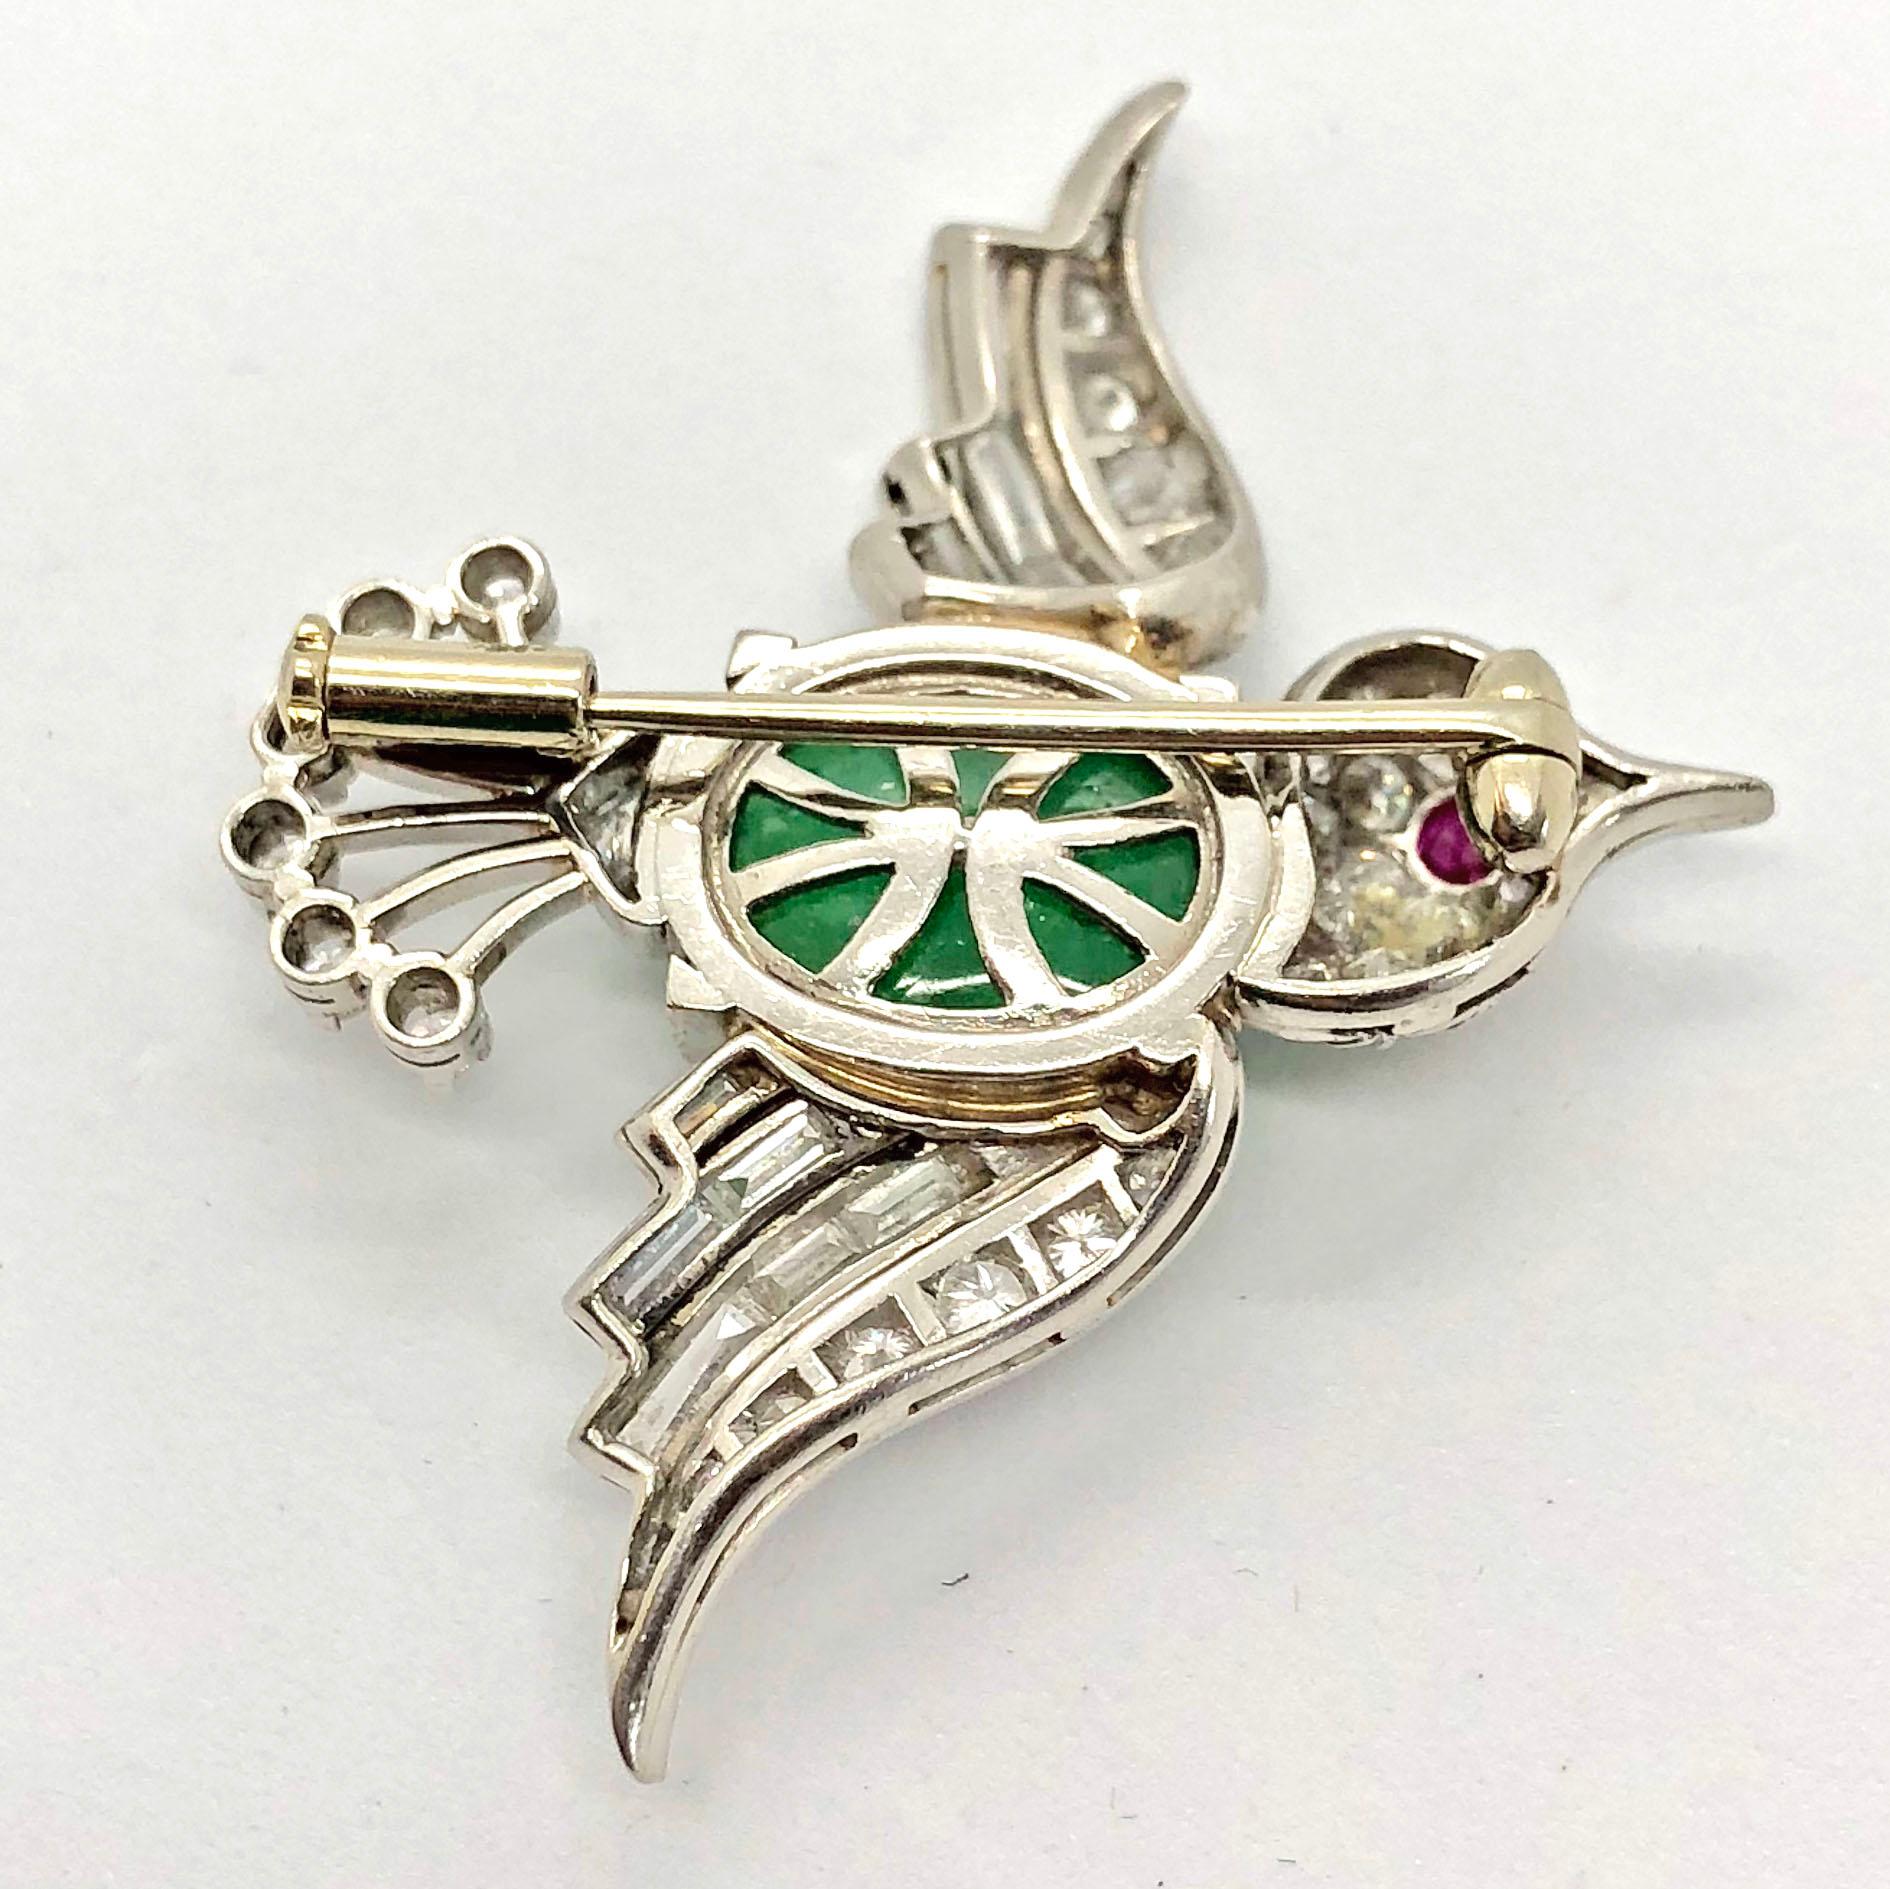 A cute late Art Deco bird brooch, circa 1940s. The bird body centres an emerald cabochon, weighing ca. 6 carats. The eye is made out of a ruby cabochon and the feathers and head of the bird are artistically studded with diamond round brilliants,